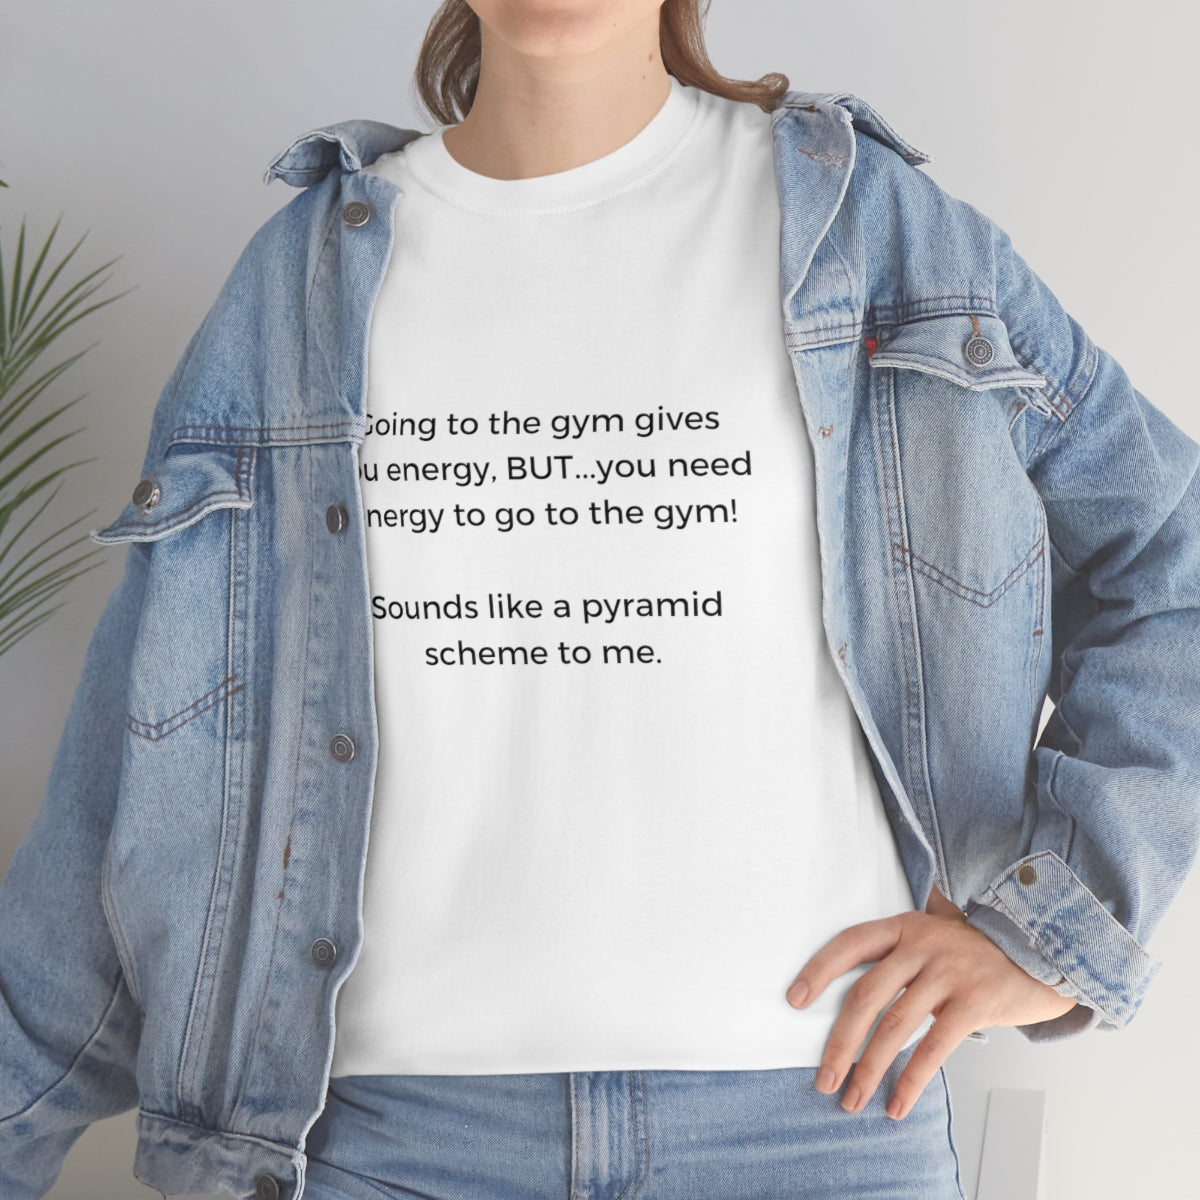 Occupational Therapy Shirt, Funny Gym Shirt, Funny Tshirts, Workout Shirts, Gym Shirt, Workout Apparel, Pyramid Scheme, Workout Clothes - The Good Life Vibe